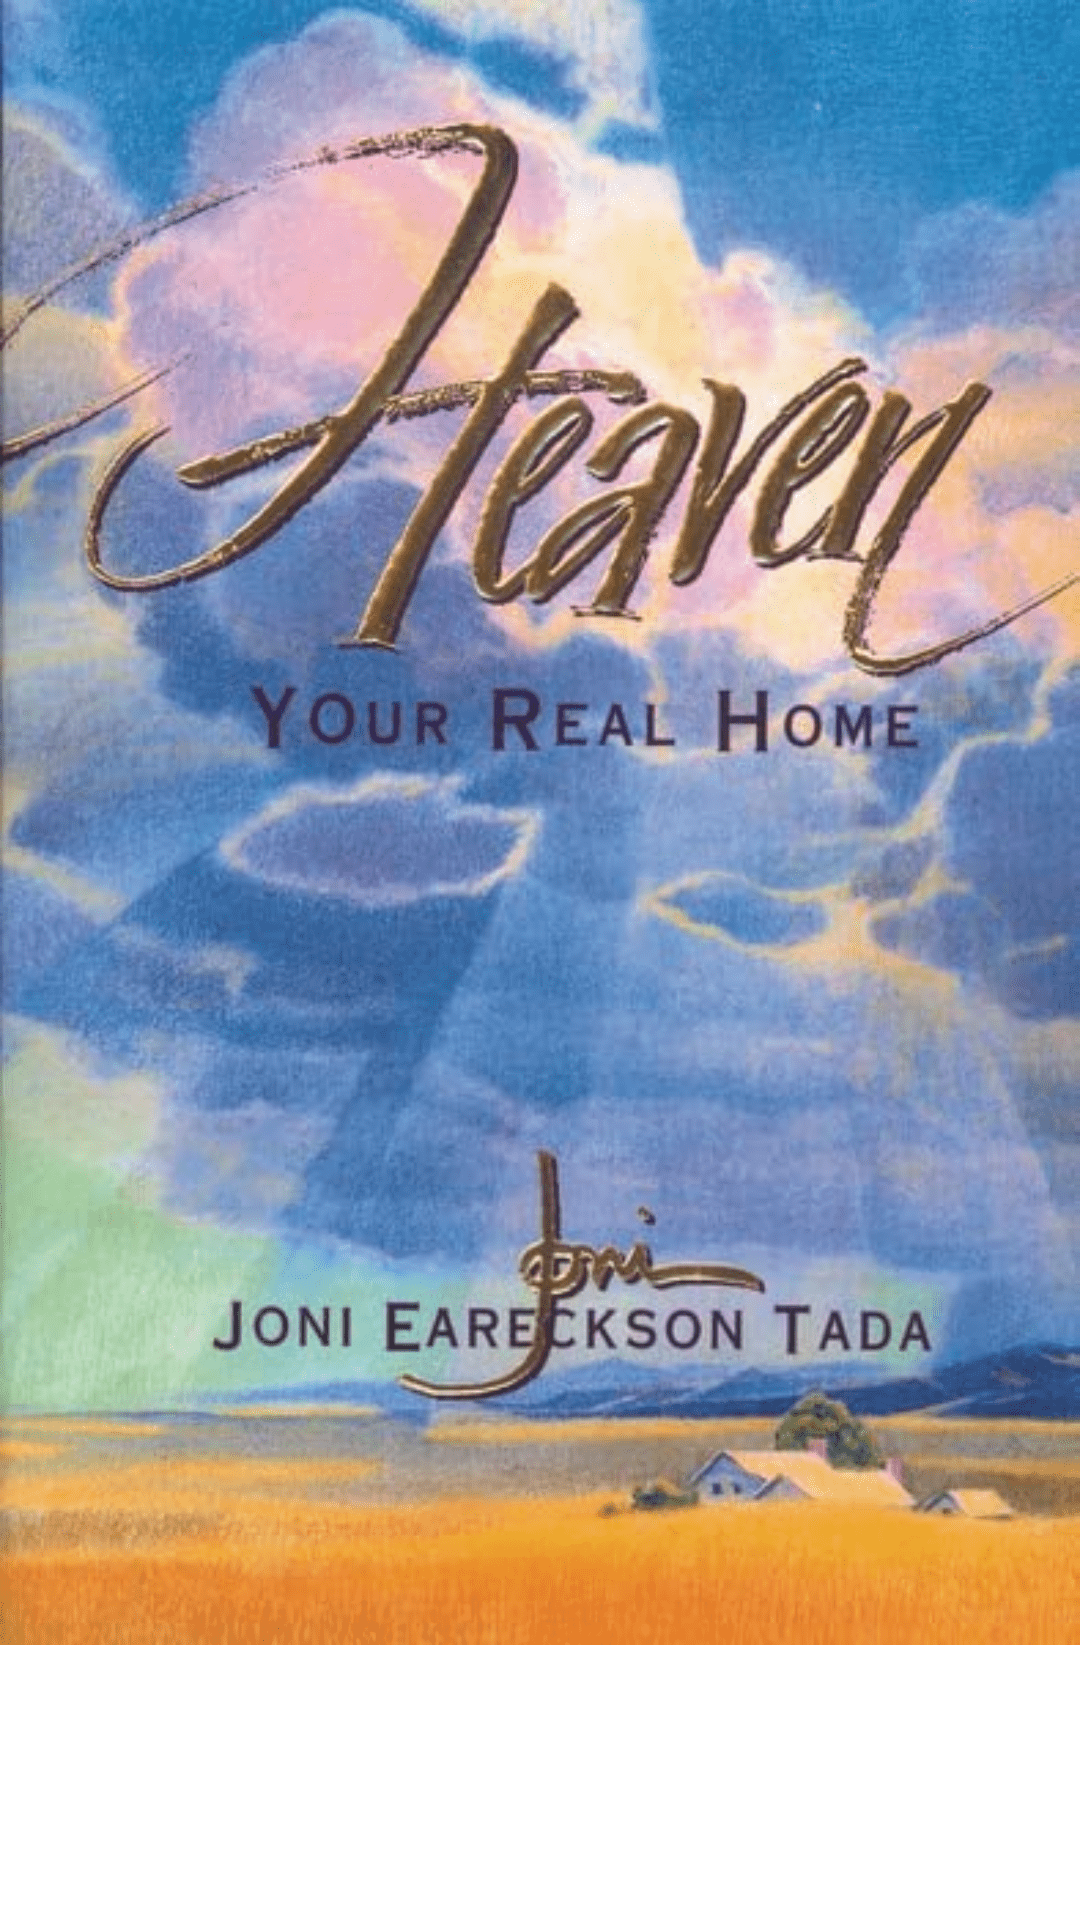 Heaven: Your Real Home